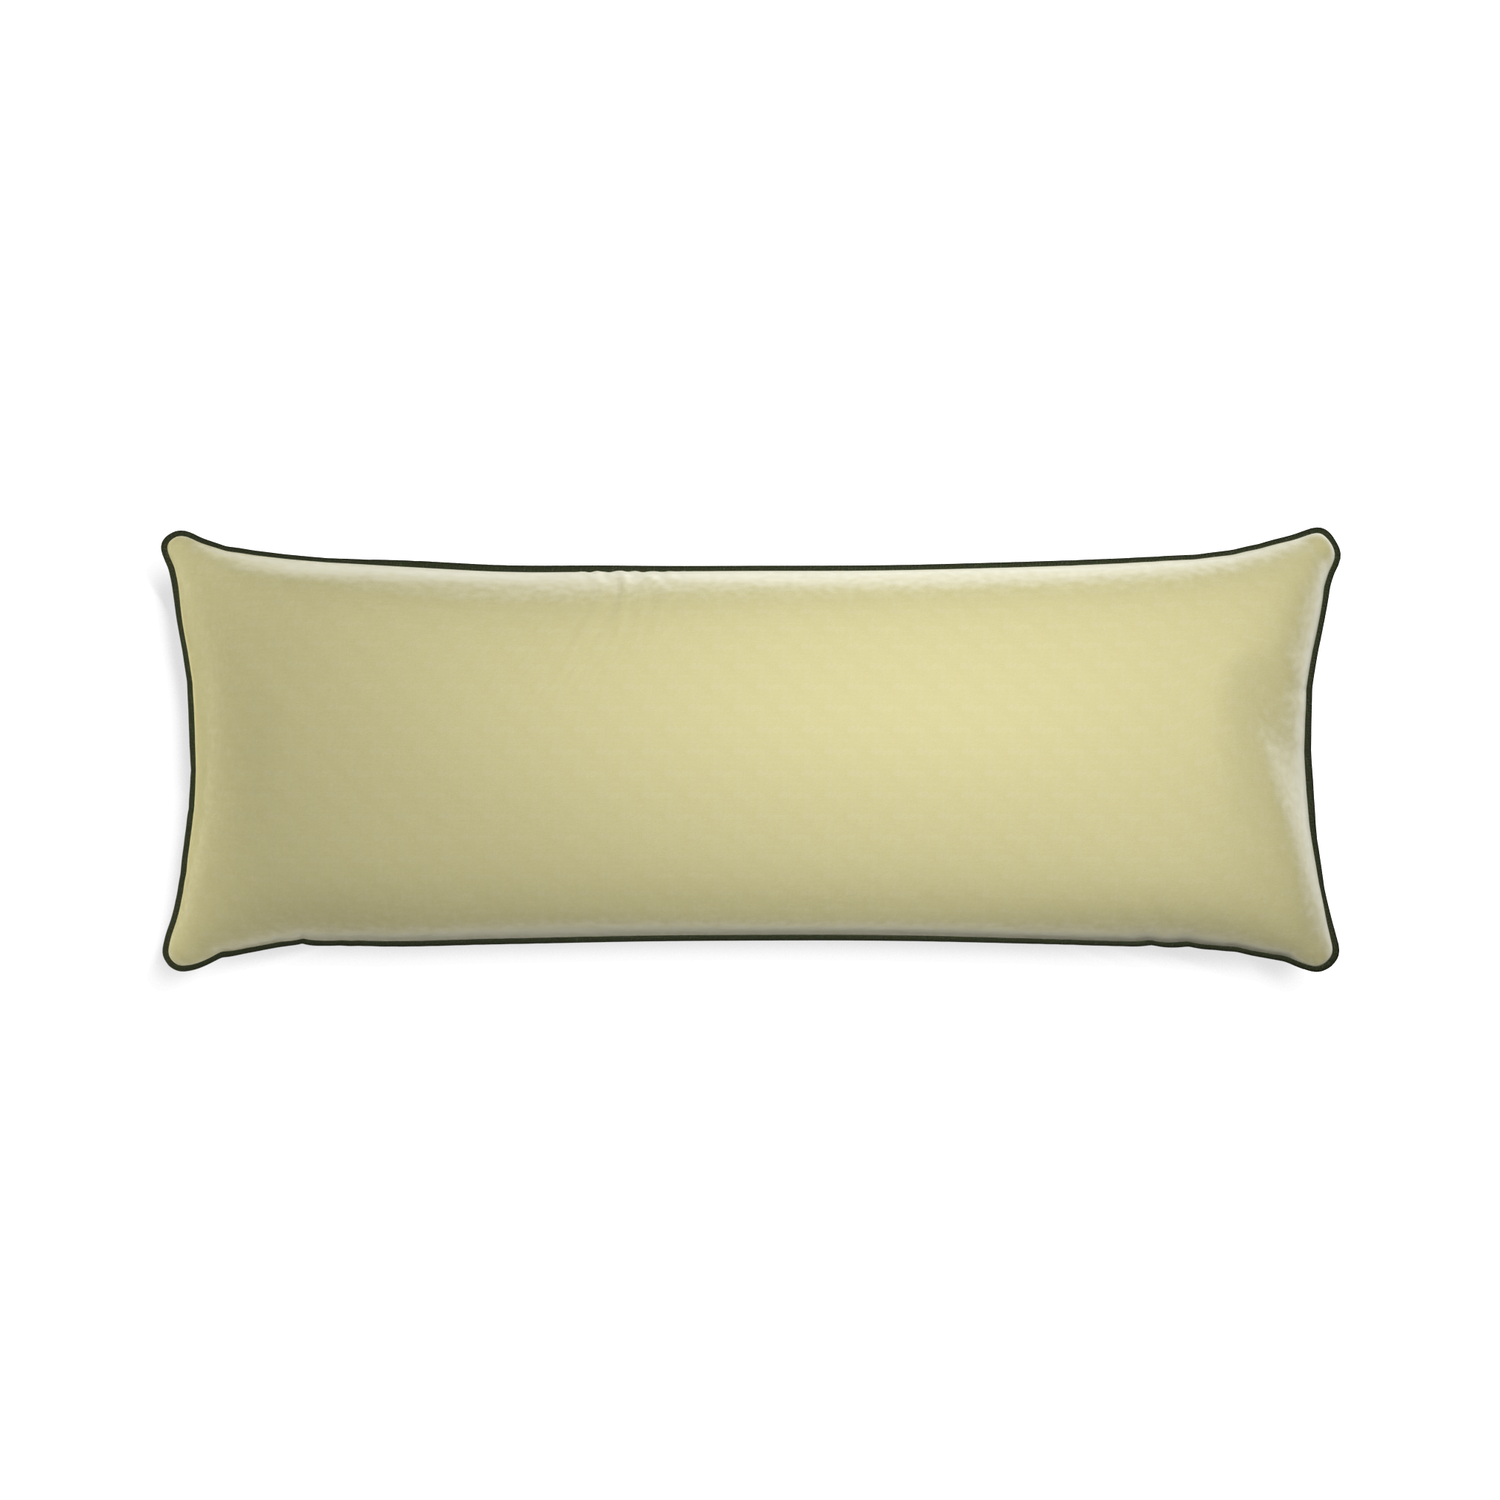 Xl-lumbar pear velvet custom pillow with f piping on white background